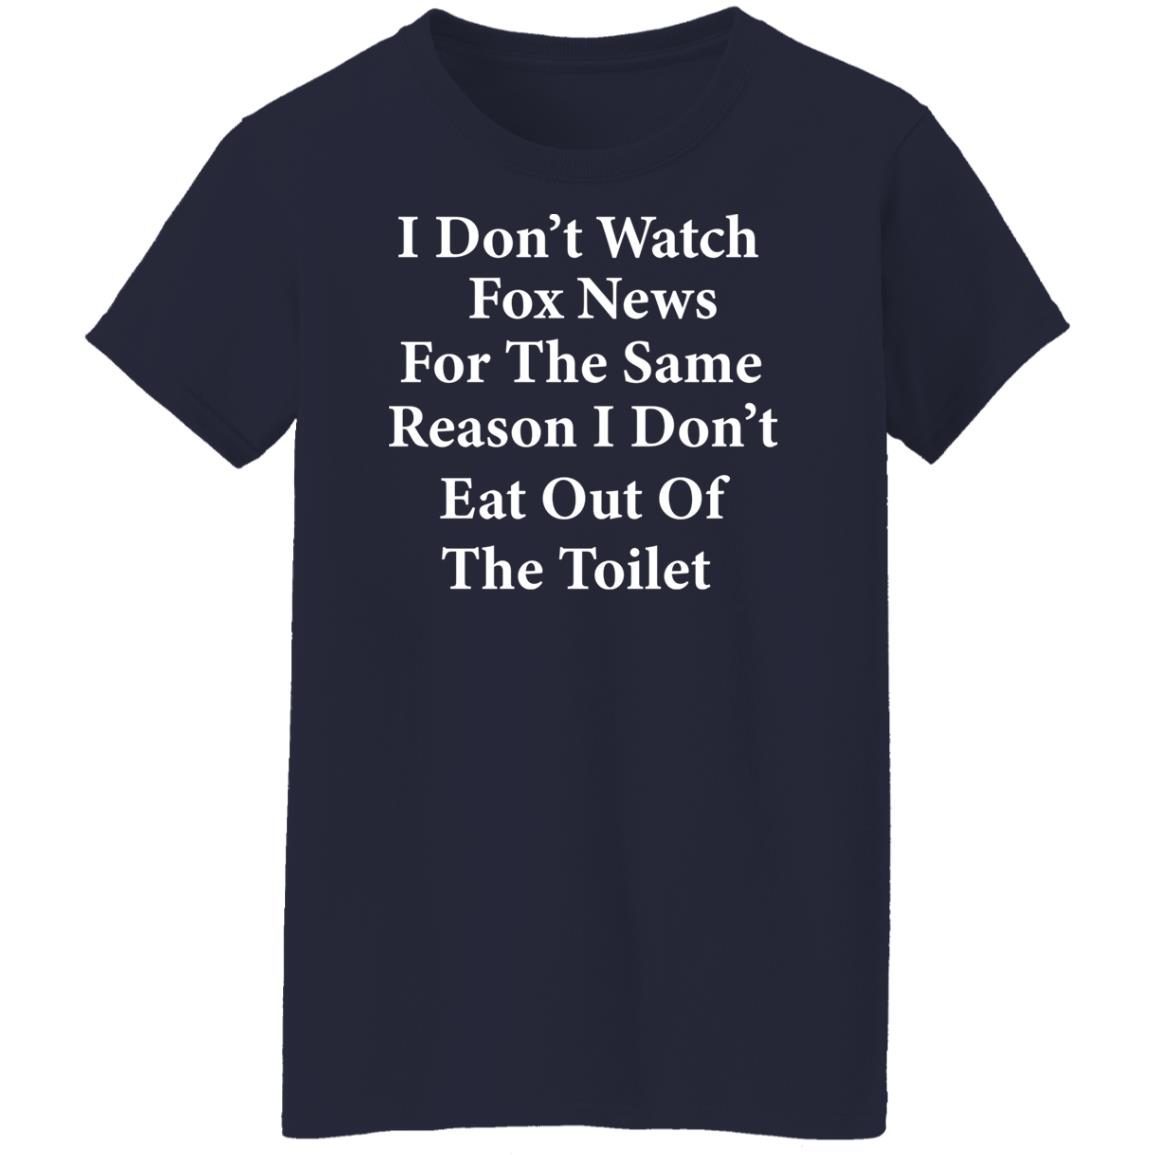 I don’t watch fox news for the same reason i don’t eat out of the toilet shirt